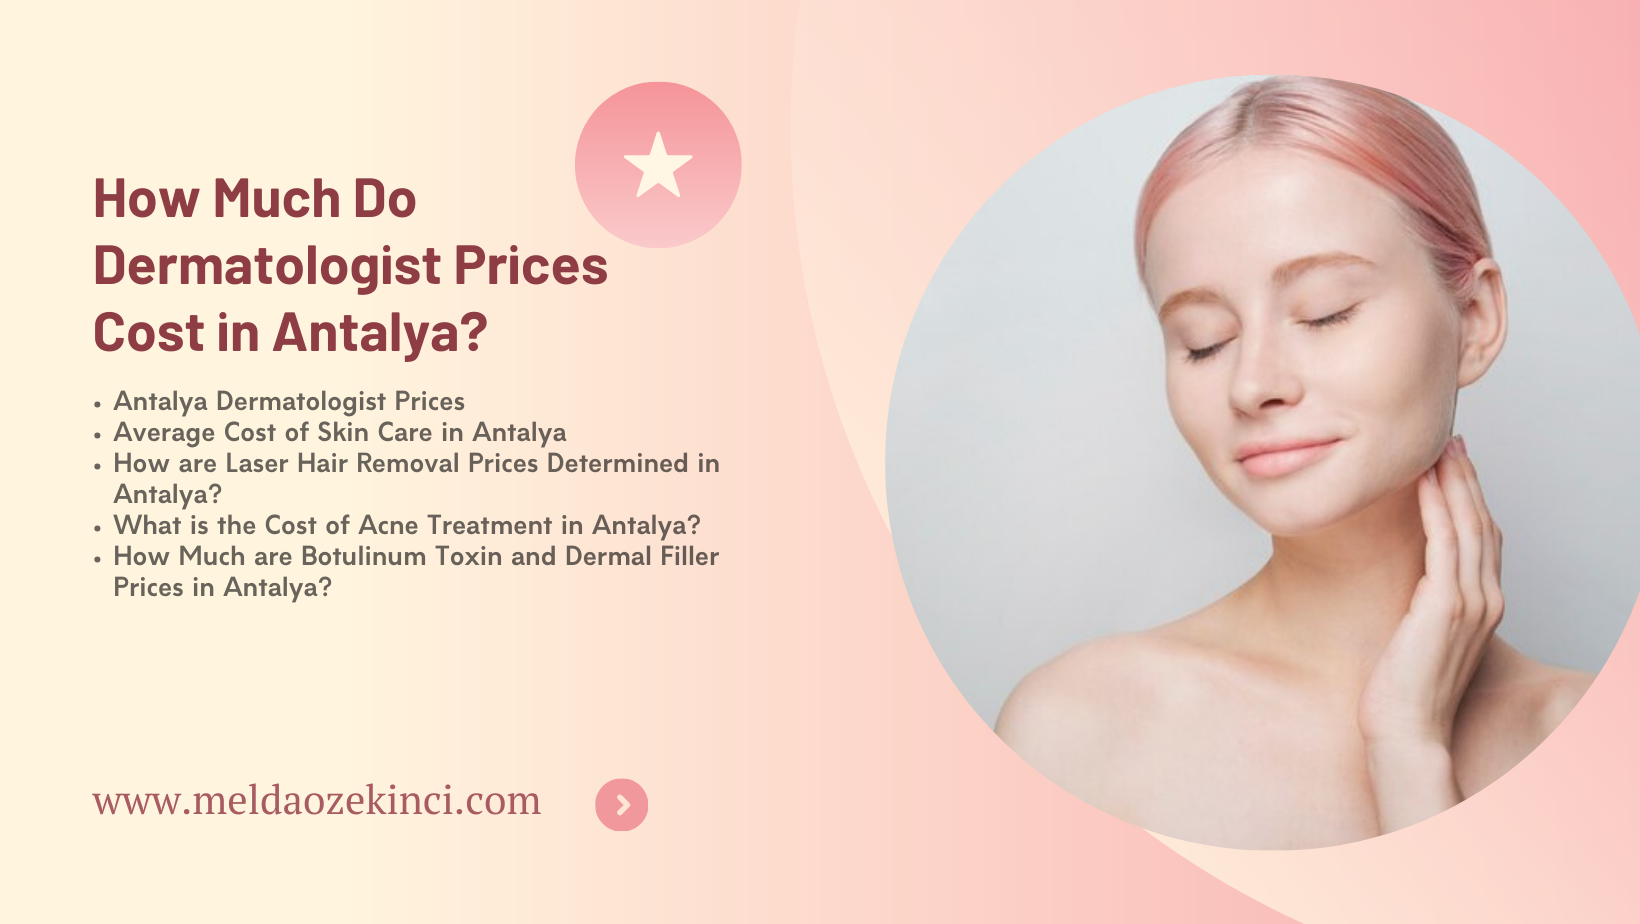 How Much Do Dermatologist Prices Cost in Antalya?